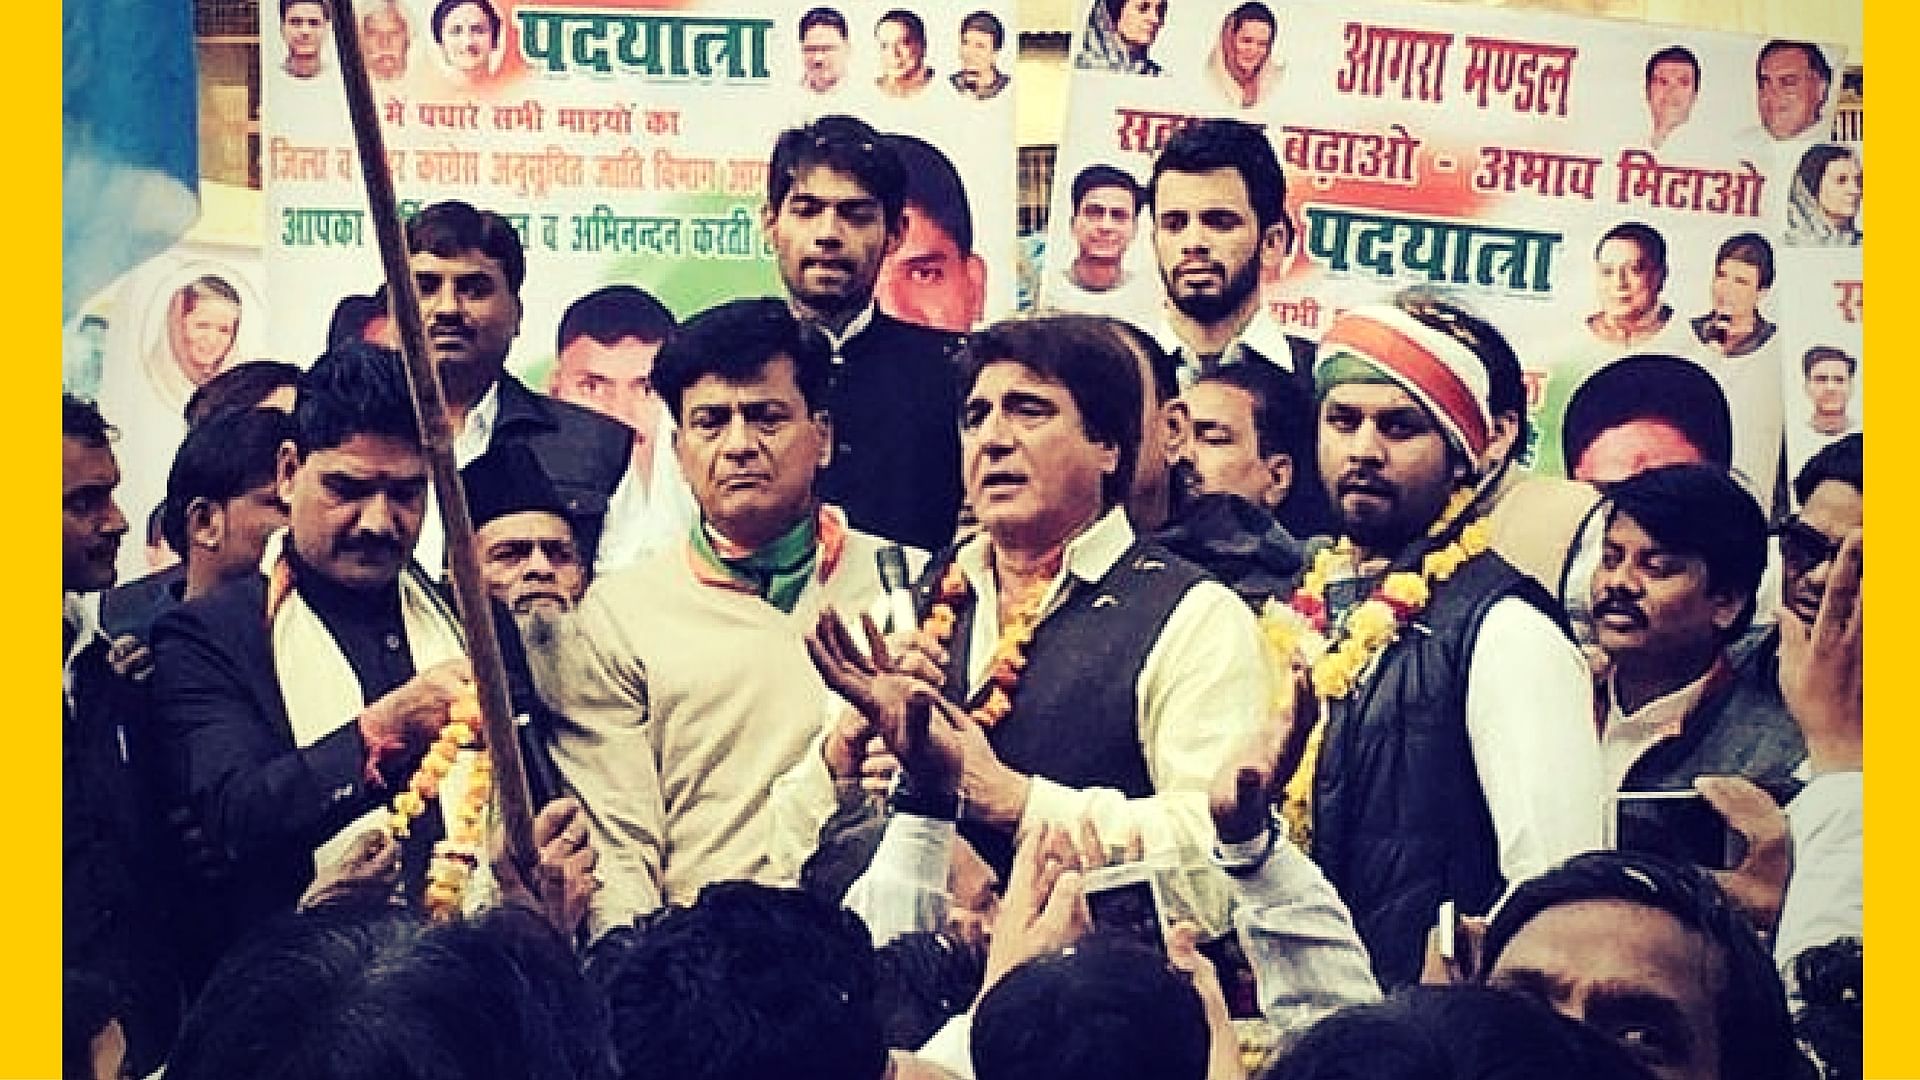 

Raj Babbar is appointed the new UP Congress Committee President. (Photo Courtesy: <a href="https://twitter.com/RajBabbarMP/media">Twitter/RajBabbarMP</a>)